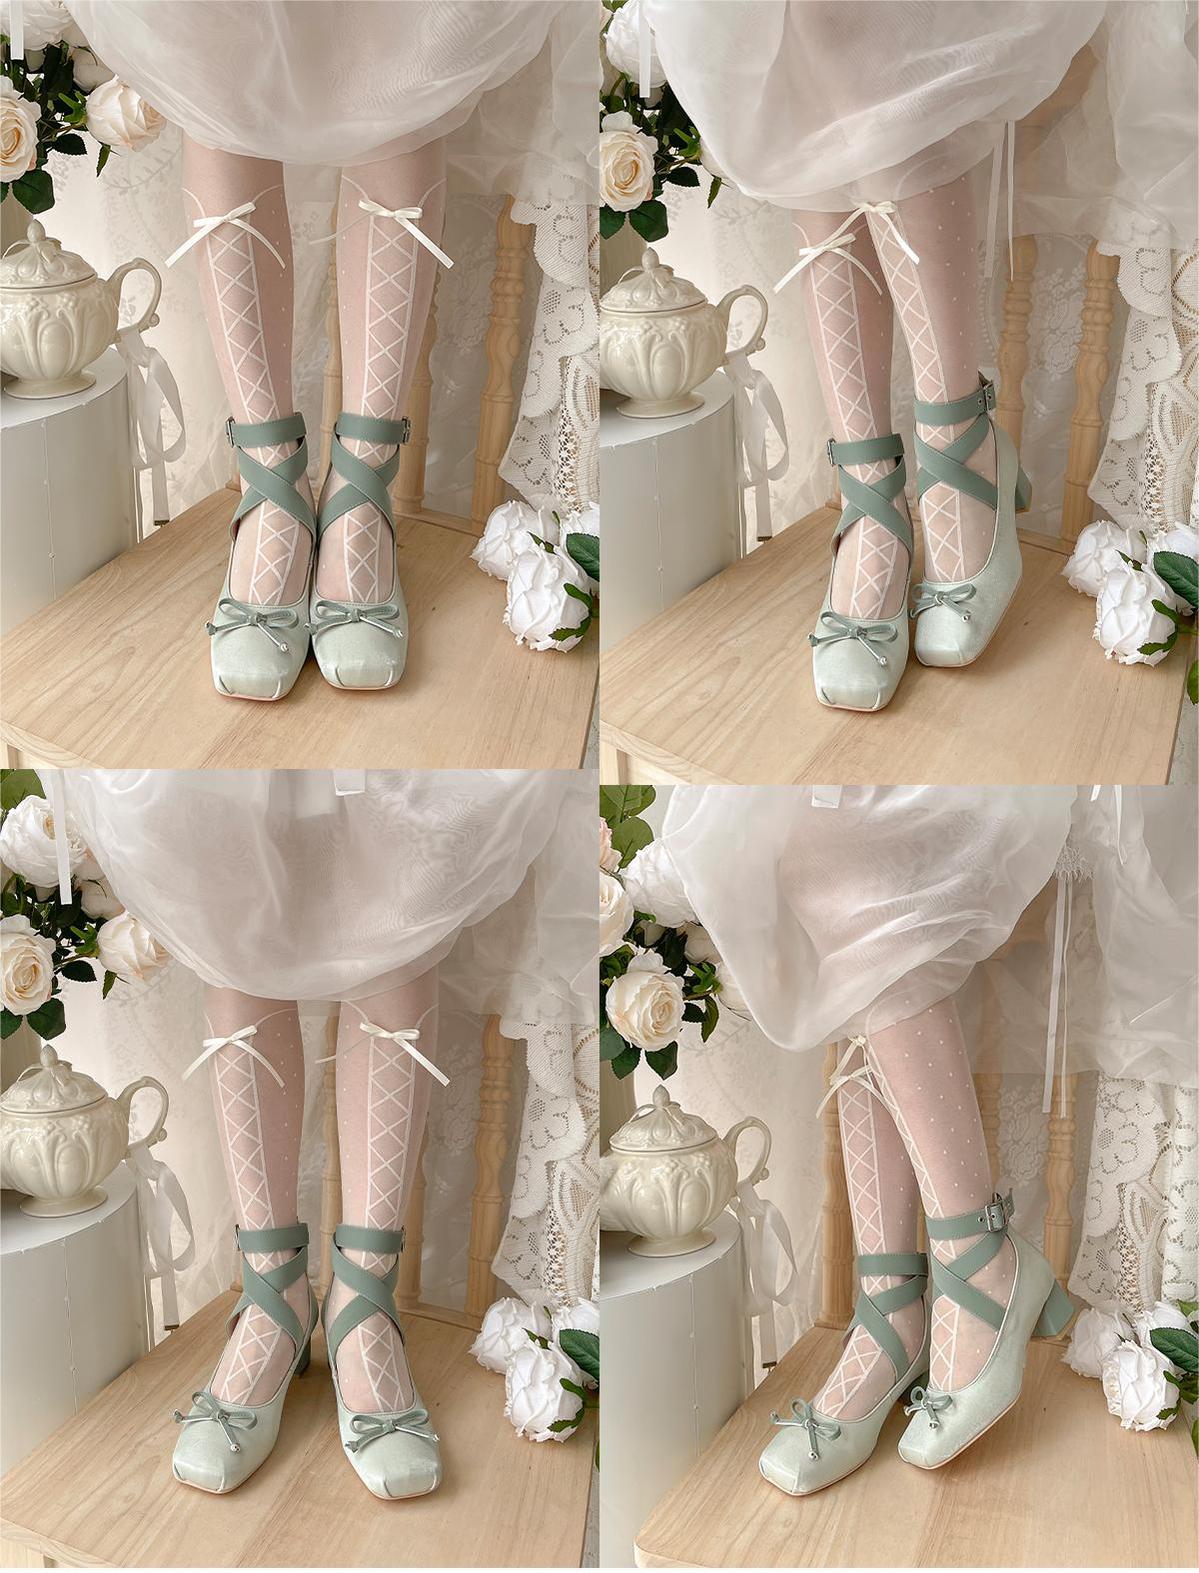 Lolita Shoes Ballet Style Square Toe Bow Heels Shoes 35592:543896